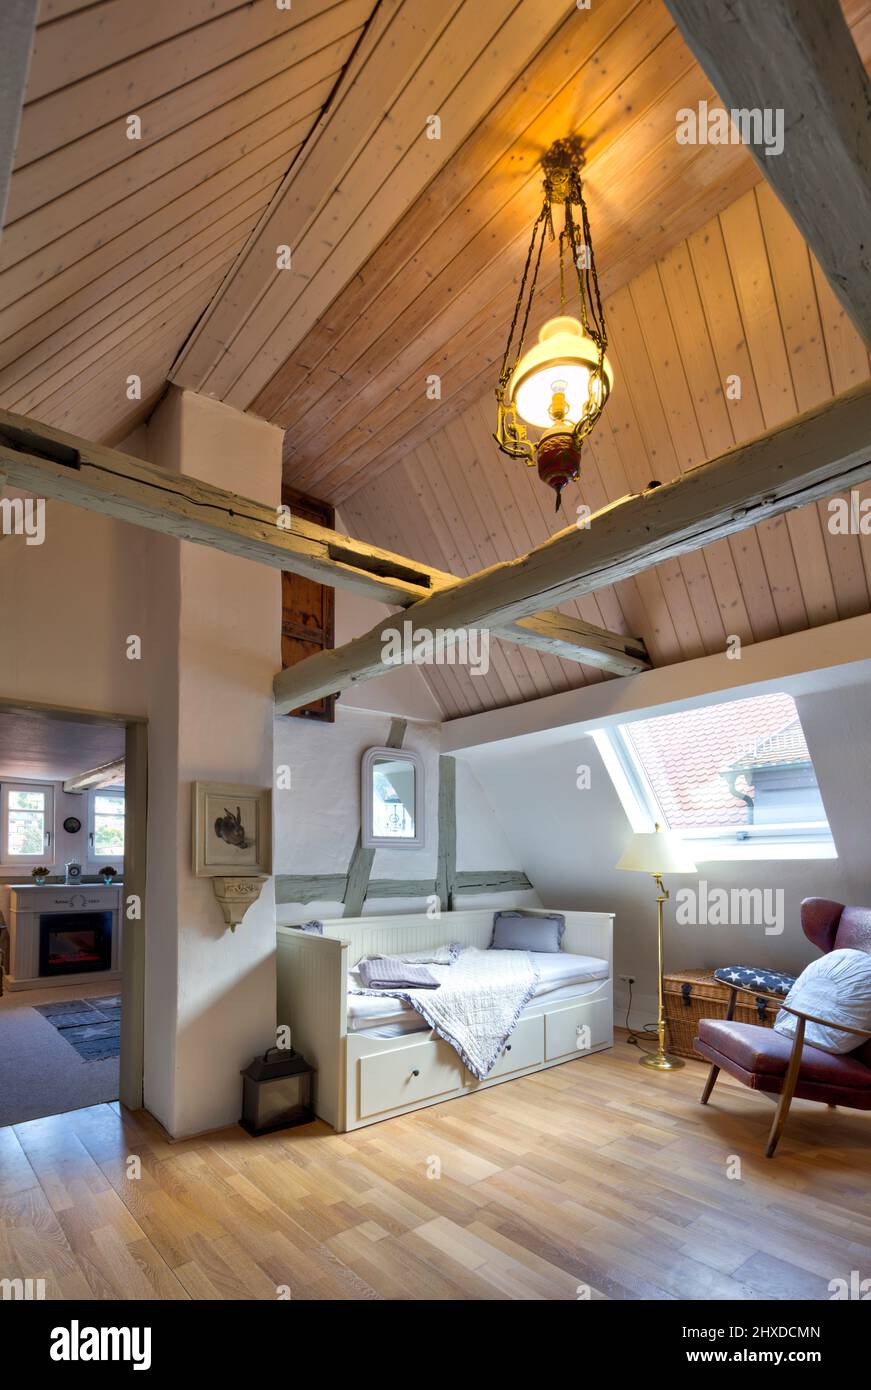 Photo reportage with text, Obere Gasse No 7, homestory, bedroom, wooden floor, open beam ceiling, renovation, interior, Rothenfels, Main Spessart, Franconia, Bavaria, Germany, Europe Stock Photo